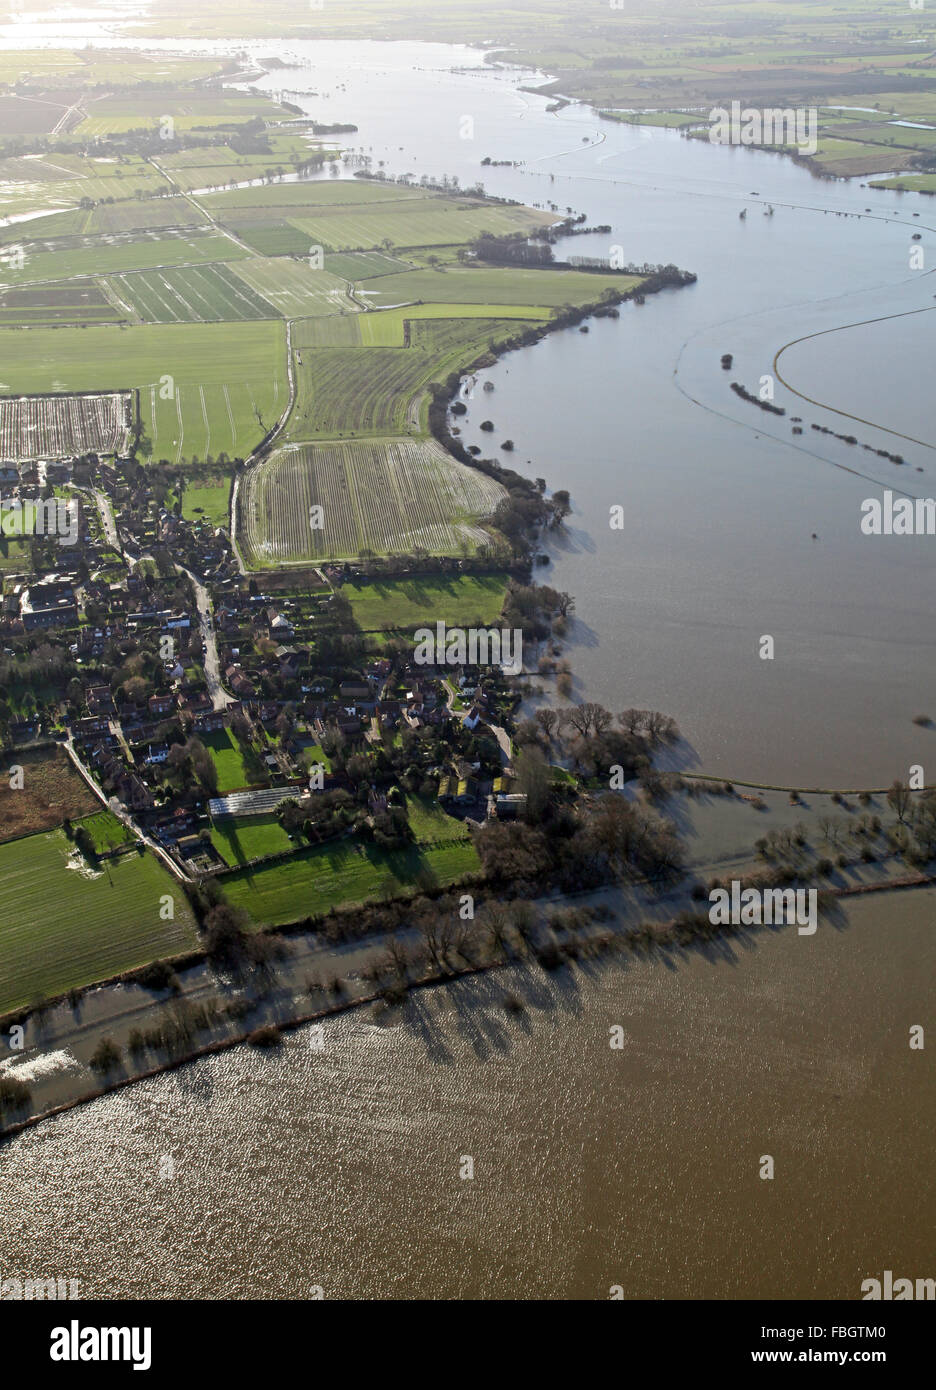 aerial view of a village on the edge of a flood plain, Yorkshire, UK Stock Photo